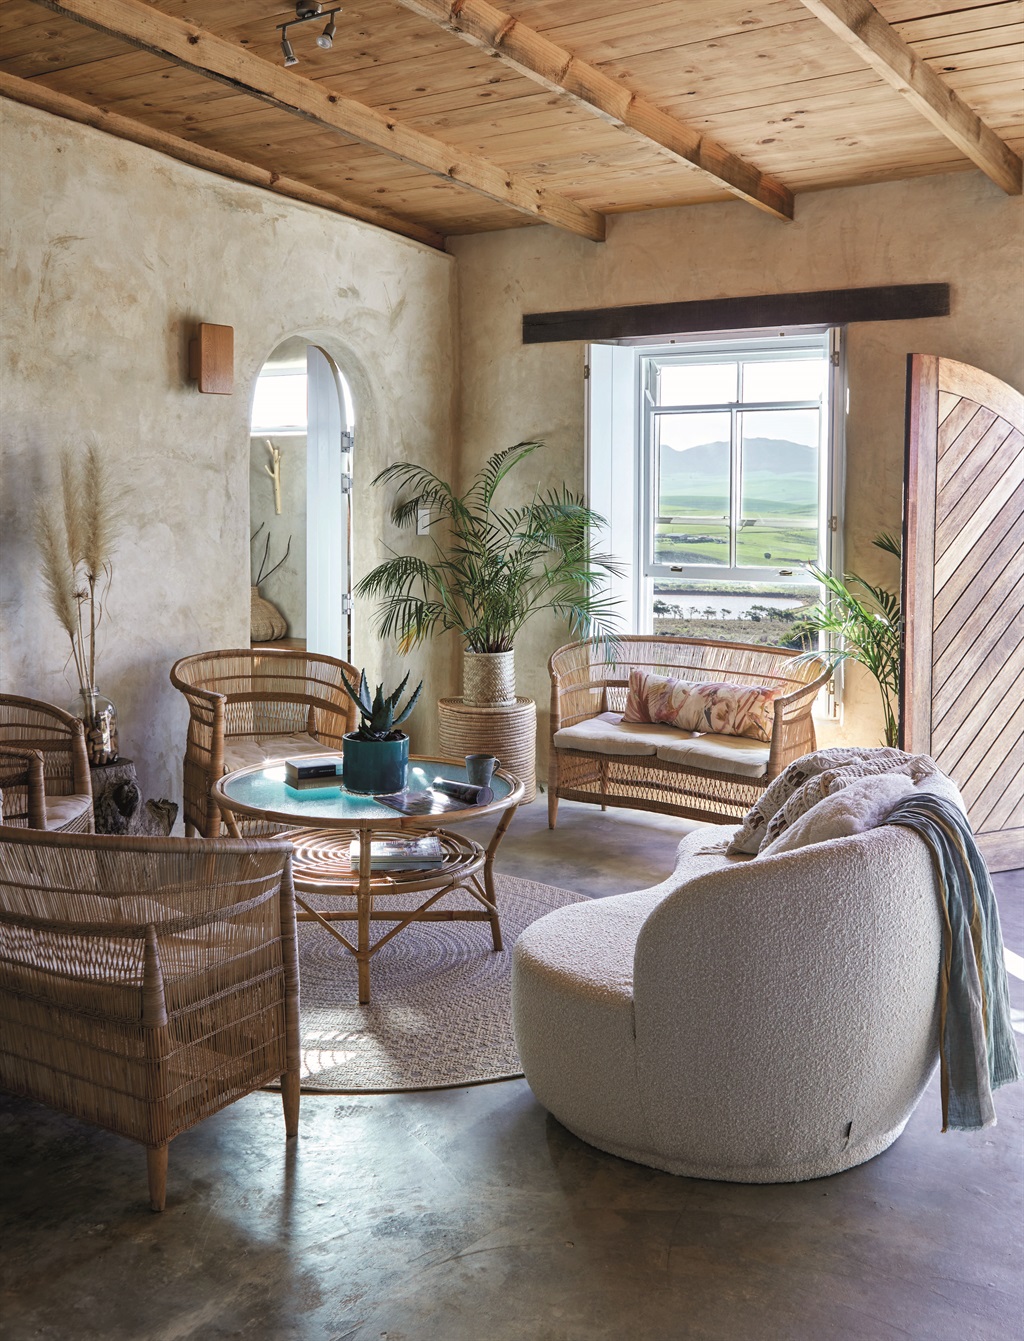 The living room boasts an unobstructed view of the Overberg Valley. The arched doorway on the left leads to the only bedroom. The ceilings were made with sustainably grown pine.
Scarf over sofa from Mungo; sofa from The Sofa Company; round rug from Hertex; rattan table from Mebel